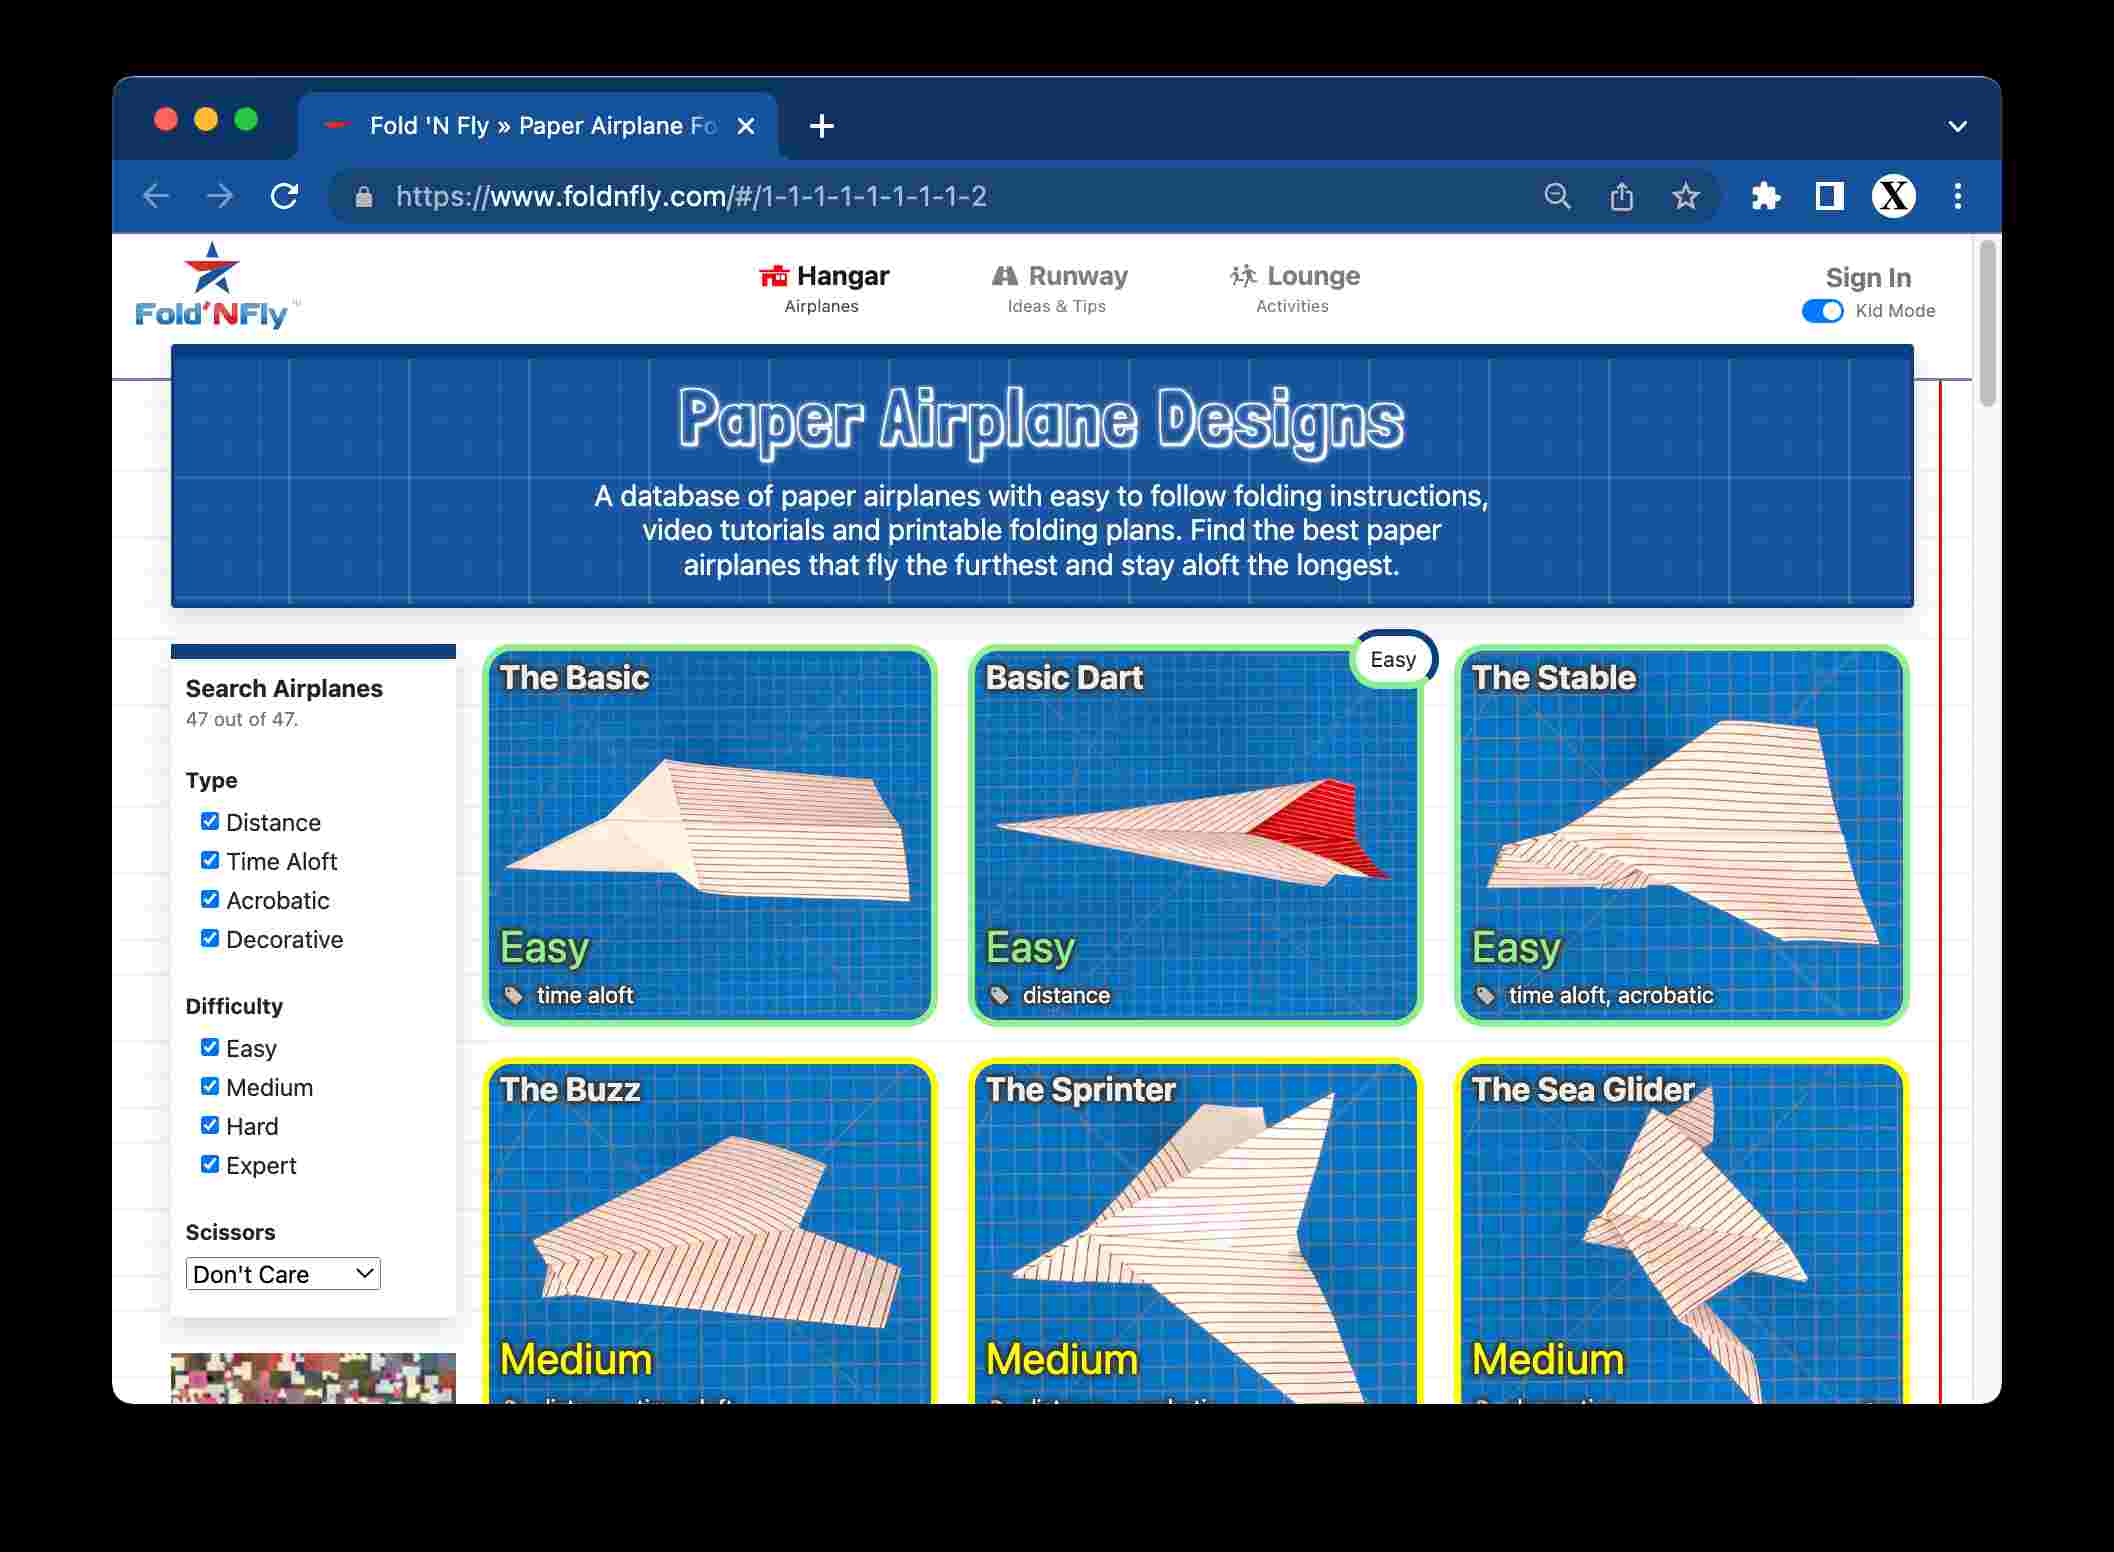 Fold 'N Fly - Paper Airplane Folding Instructions